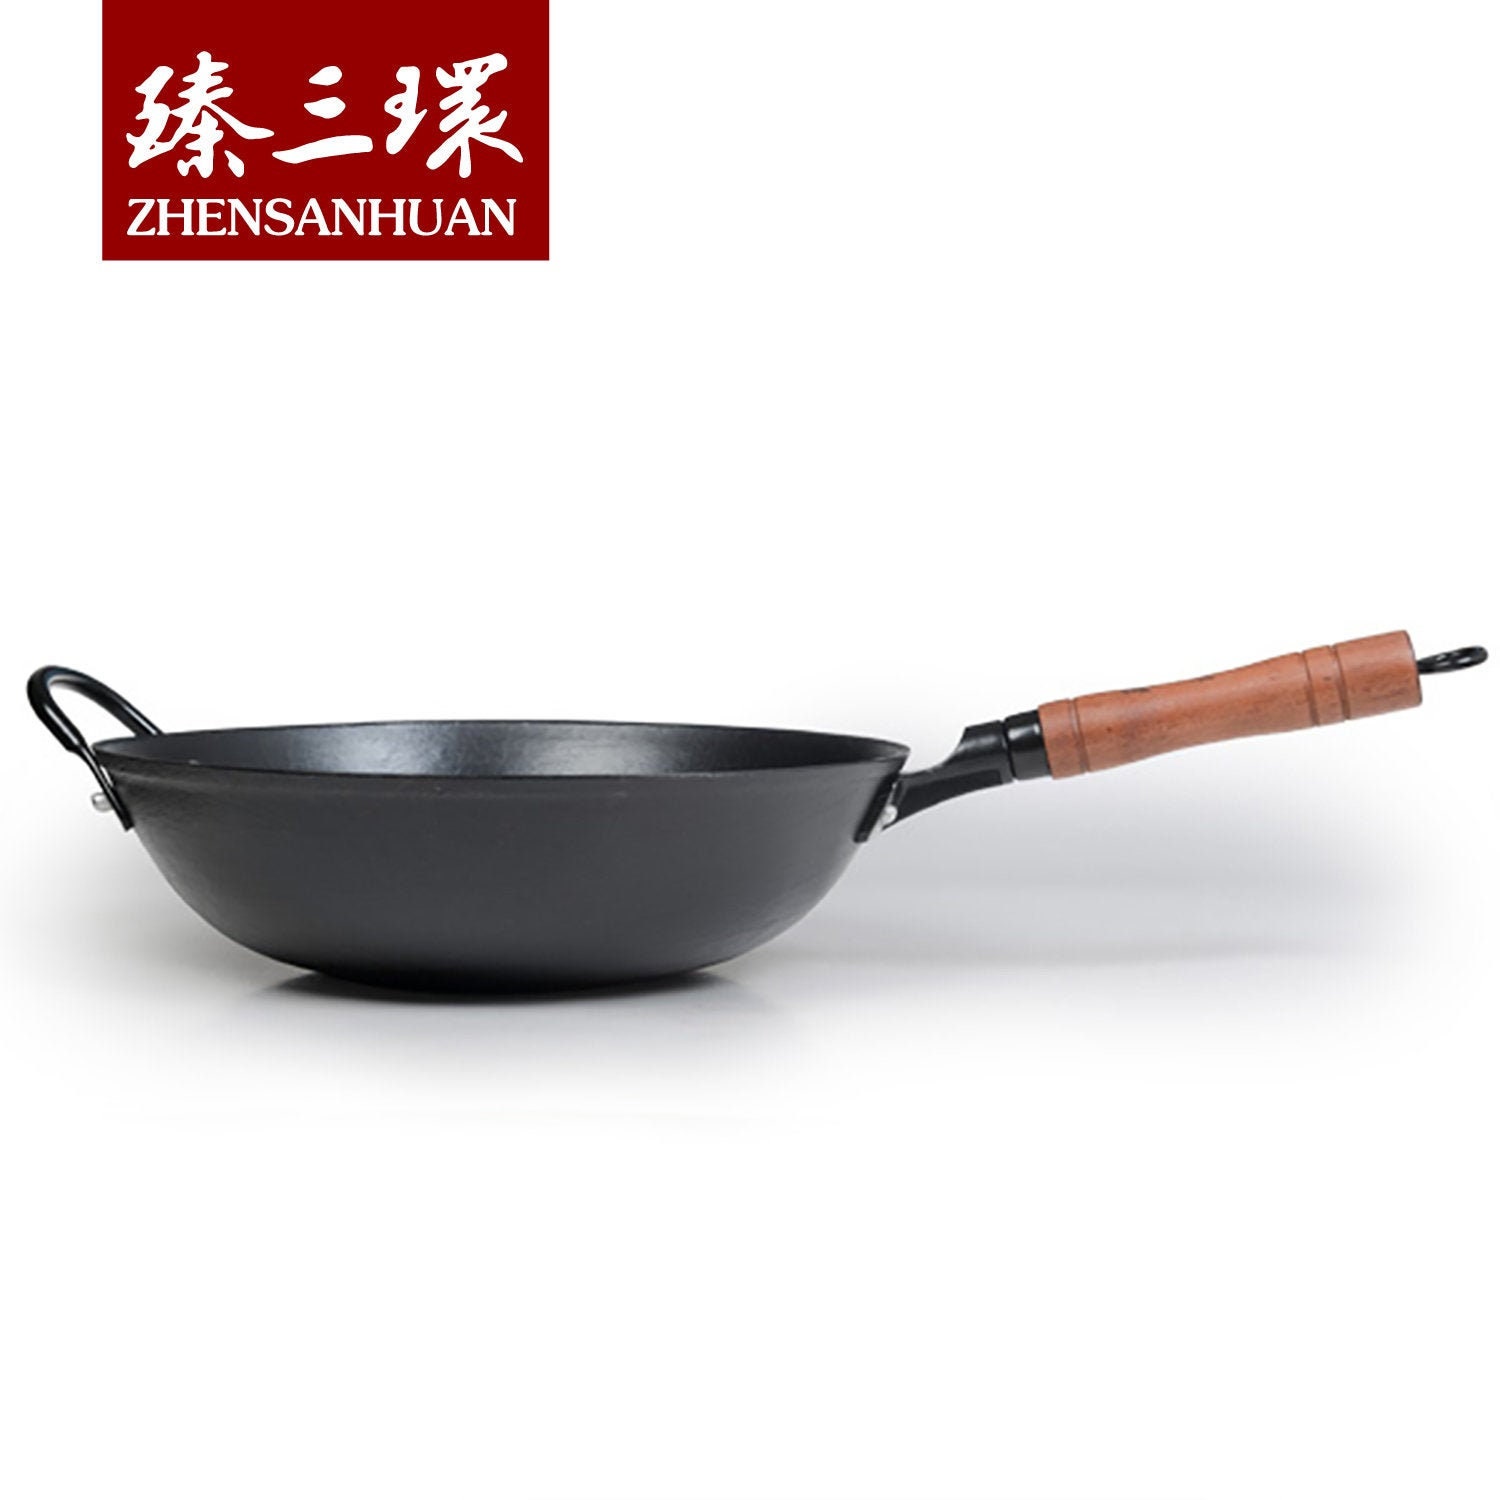 34cm Heavy Iron Wok Traditional Hand-forged Cast Iron Wok Non